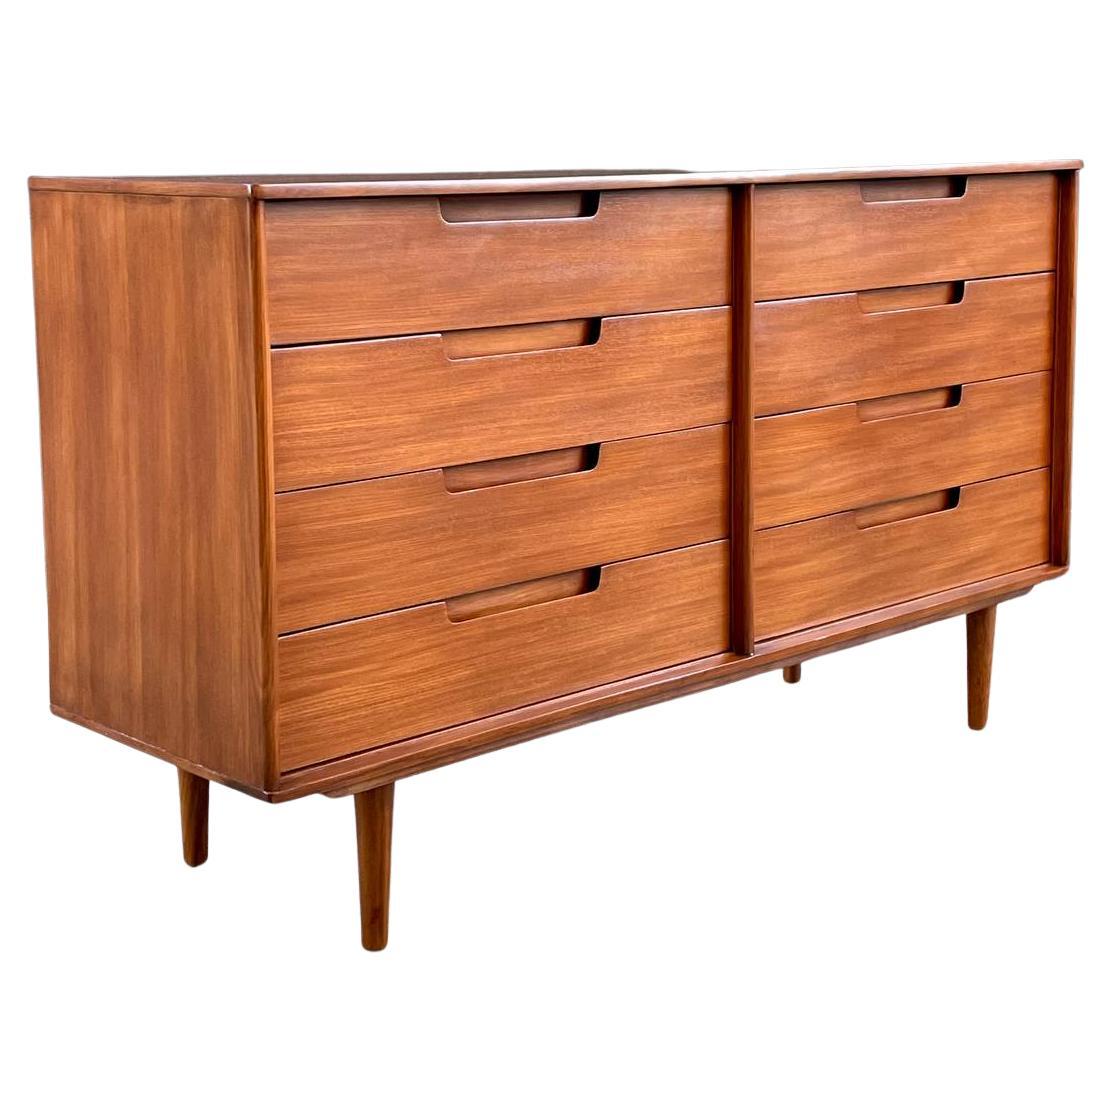 Newly Refinished - Mid-Century Modern Dresser by Milo Baughman for Drexel